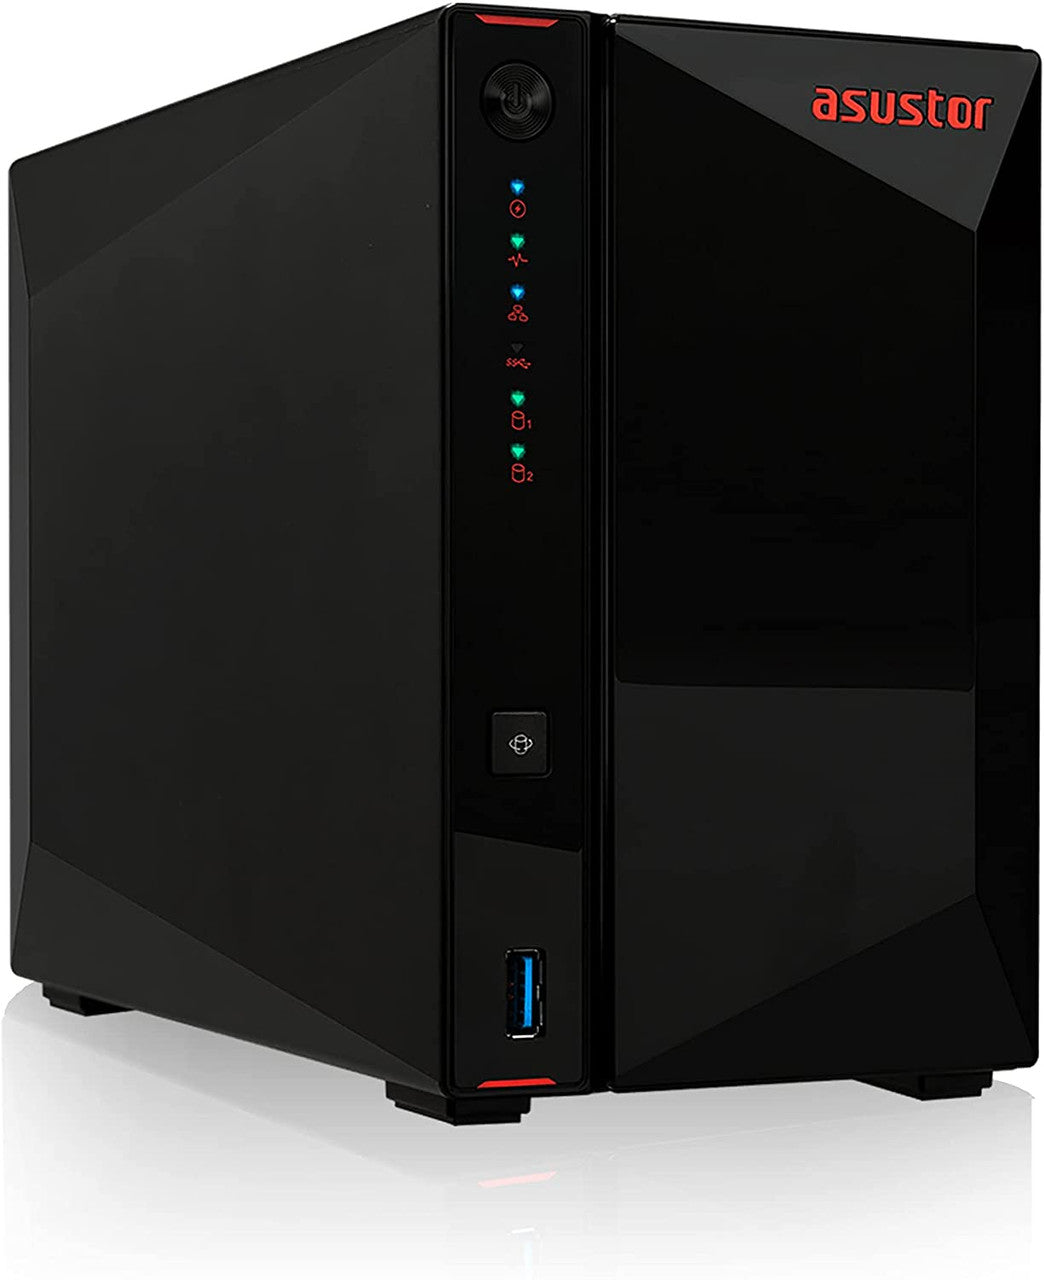 Asustor AS5202T 2-Bay Nimbustor 2 NAS with 8GB RAM and 36TB (2 x 18TB) Western Digital RED PRO Drives Fully Assembled and Tested